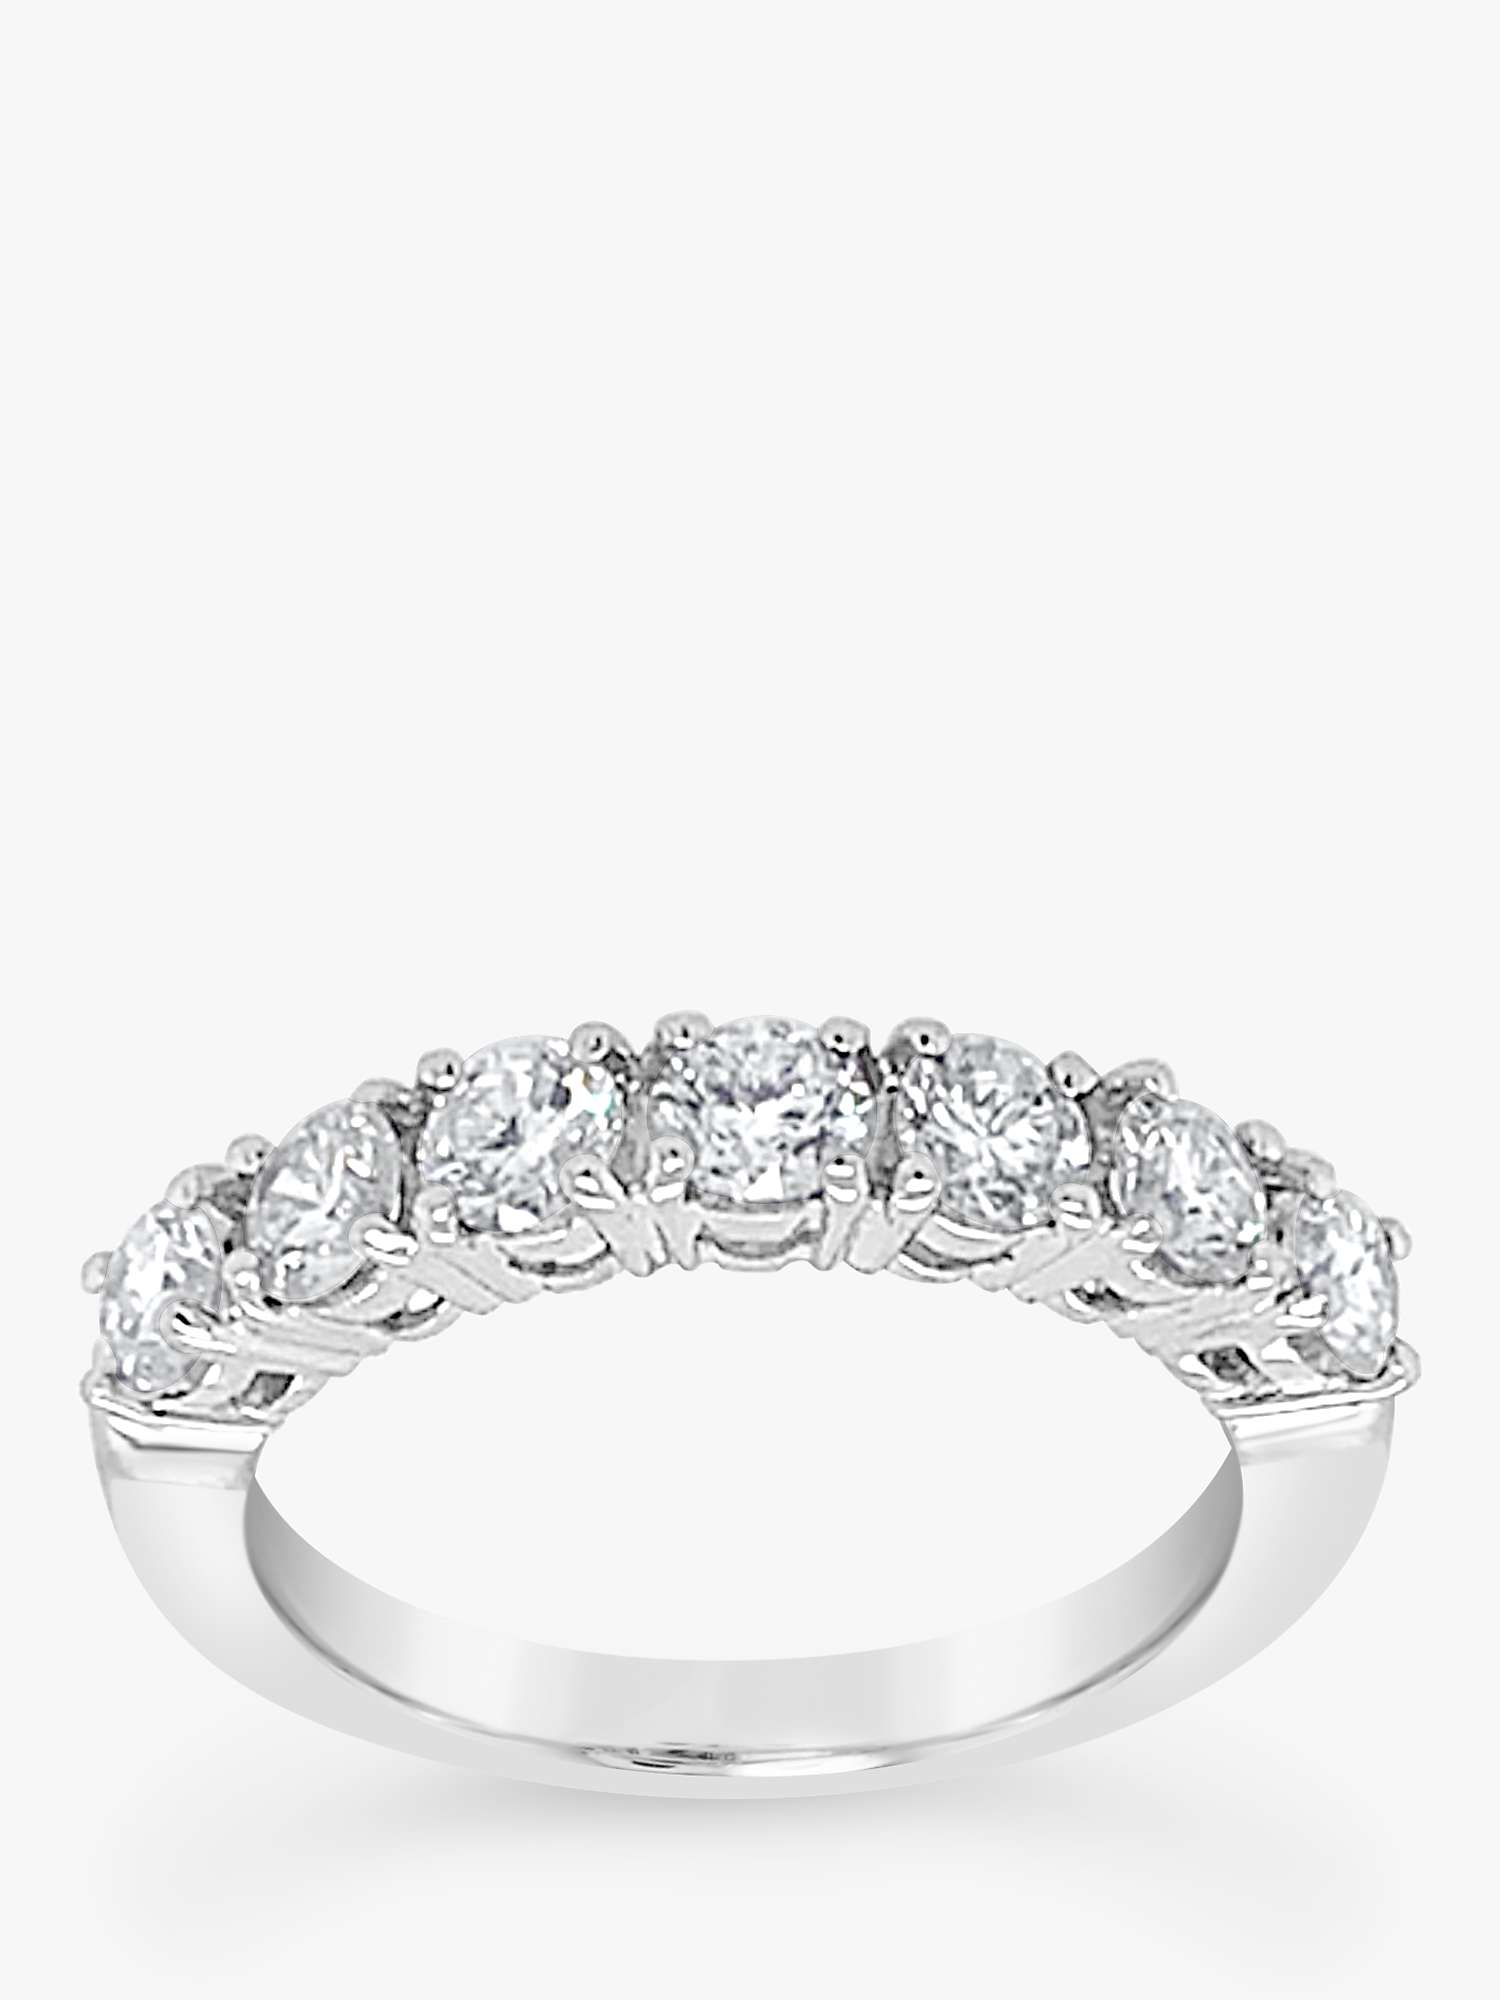 Buy Milton & Humble Jewellery 18ct White Gold Second Hand Diamond Ring Online at johnlewis.com